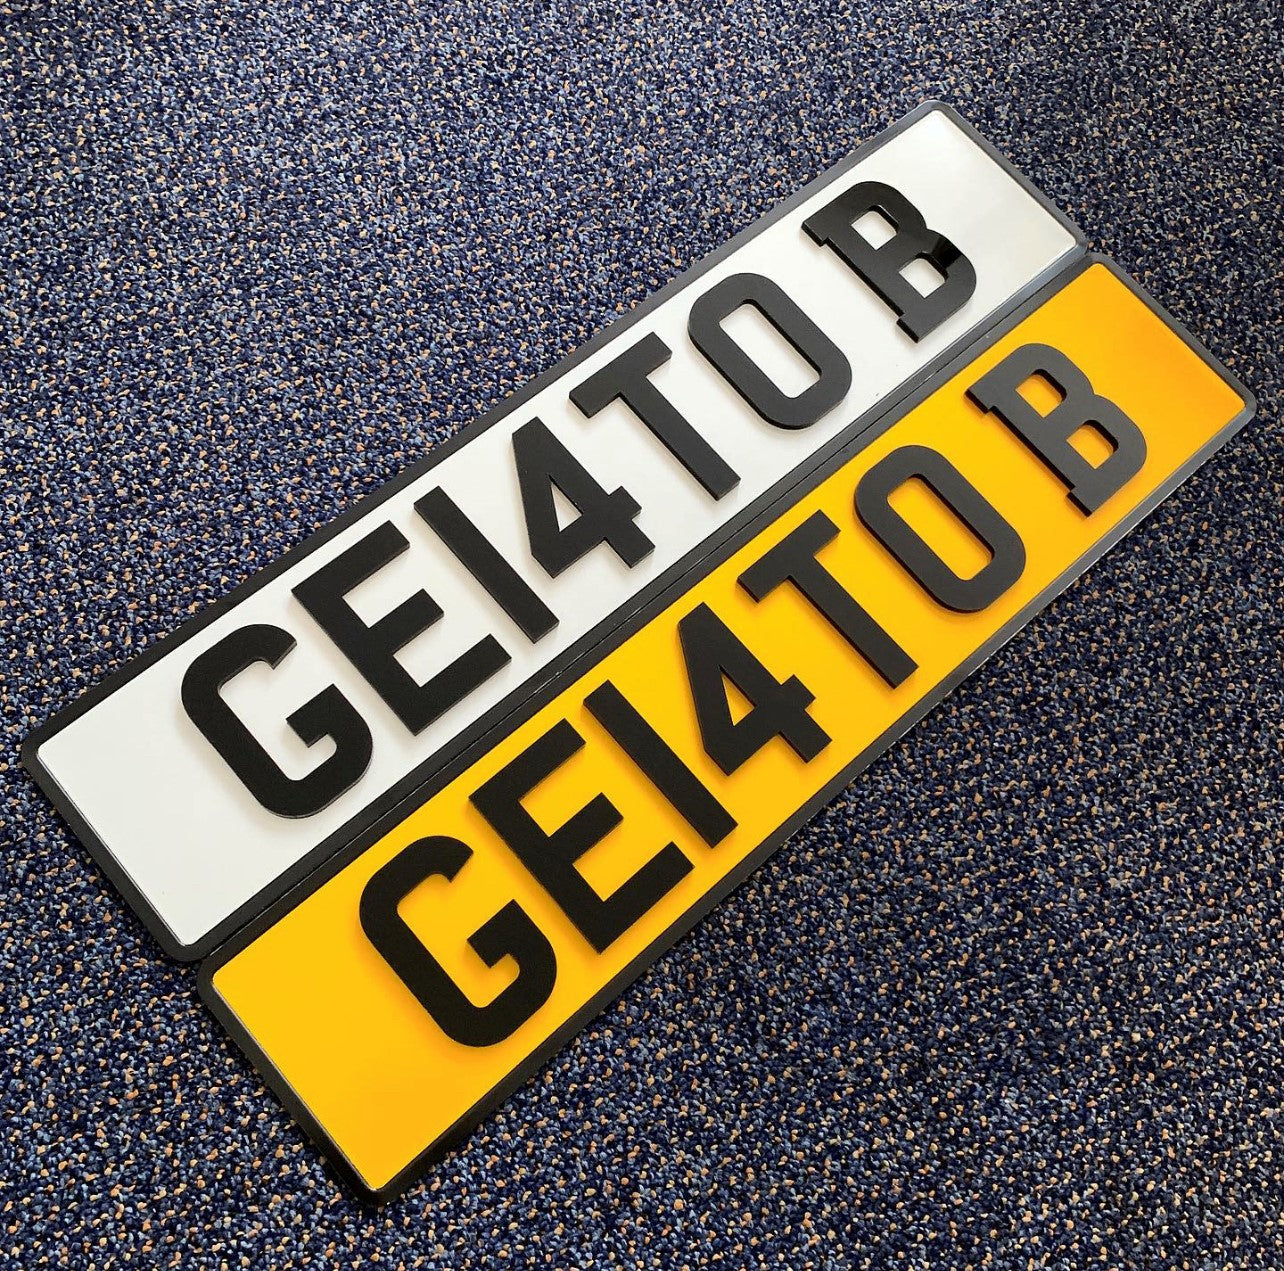 4D number plates in the UK